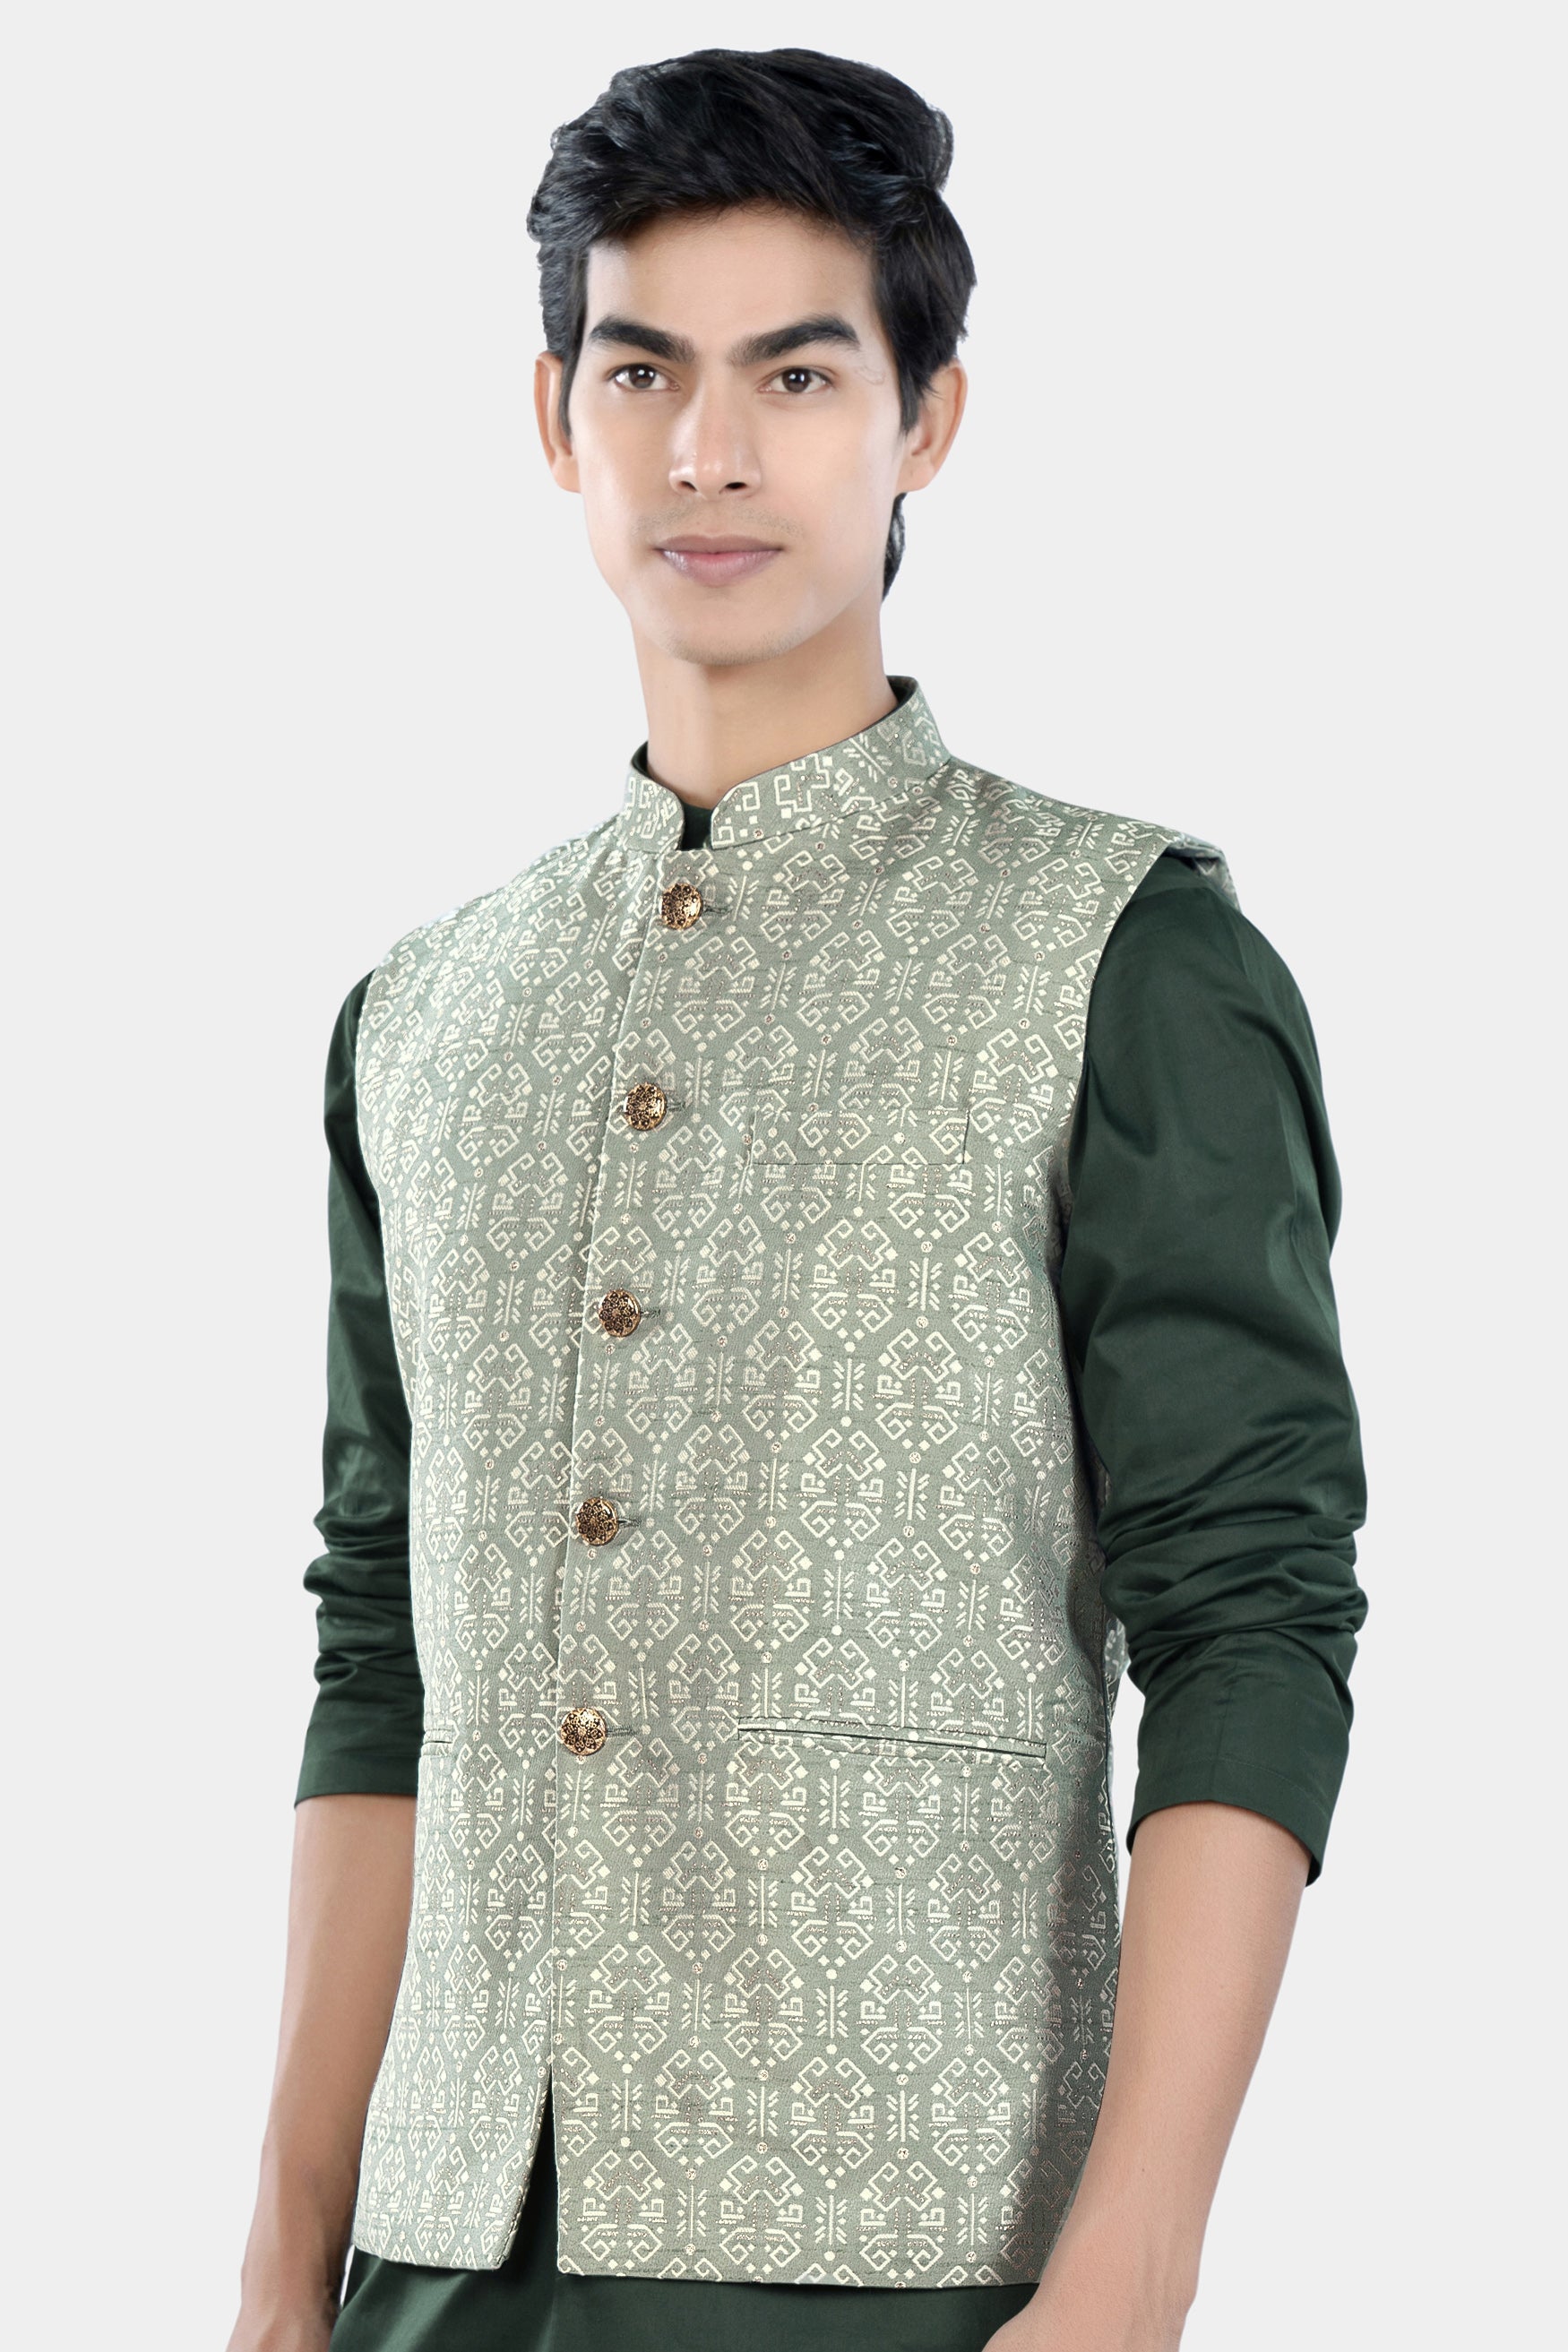 Pumice Green and White Jacquard Textured Designer Nehru Jacket WC3455-36,  WC3455-38,  WC3455-40,  WC3455-42,  WC3455-44,  WC3455-46,  WC3455-48,  WC3455-50,  WC3455-52,  WC3455-54,  WC3455-56,  WC3455-58,  WC3455-60